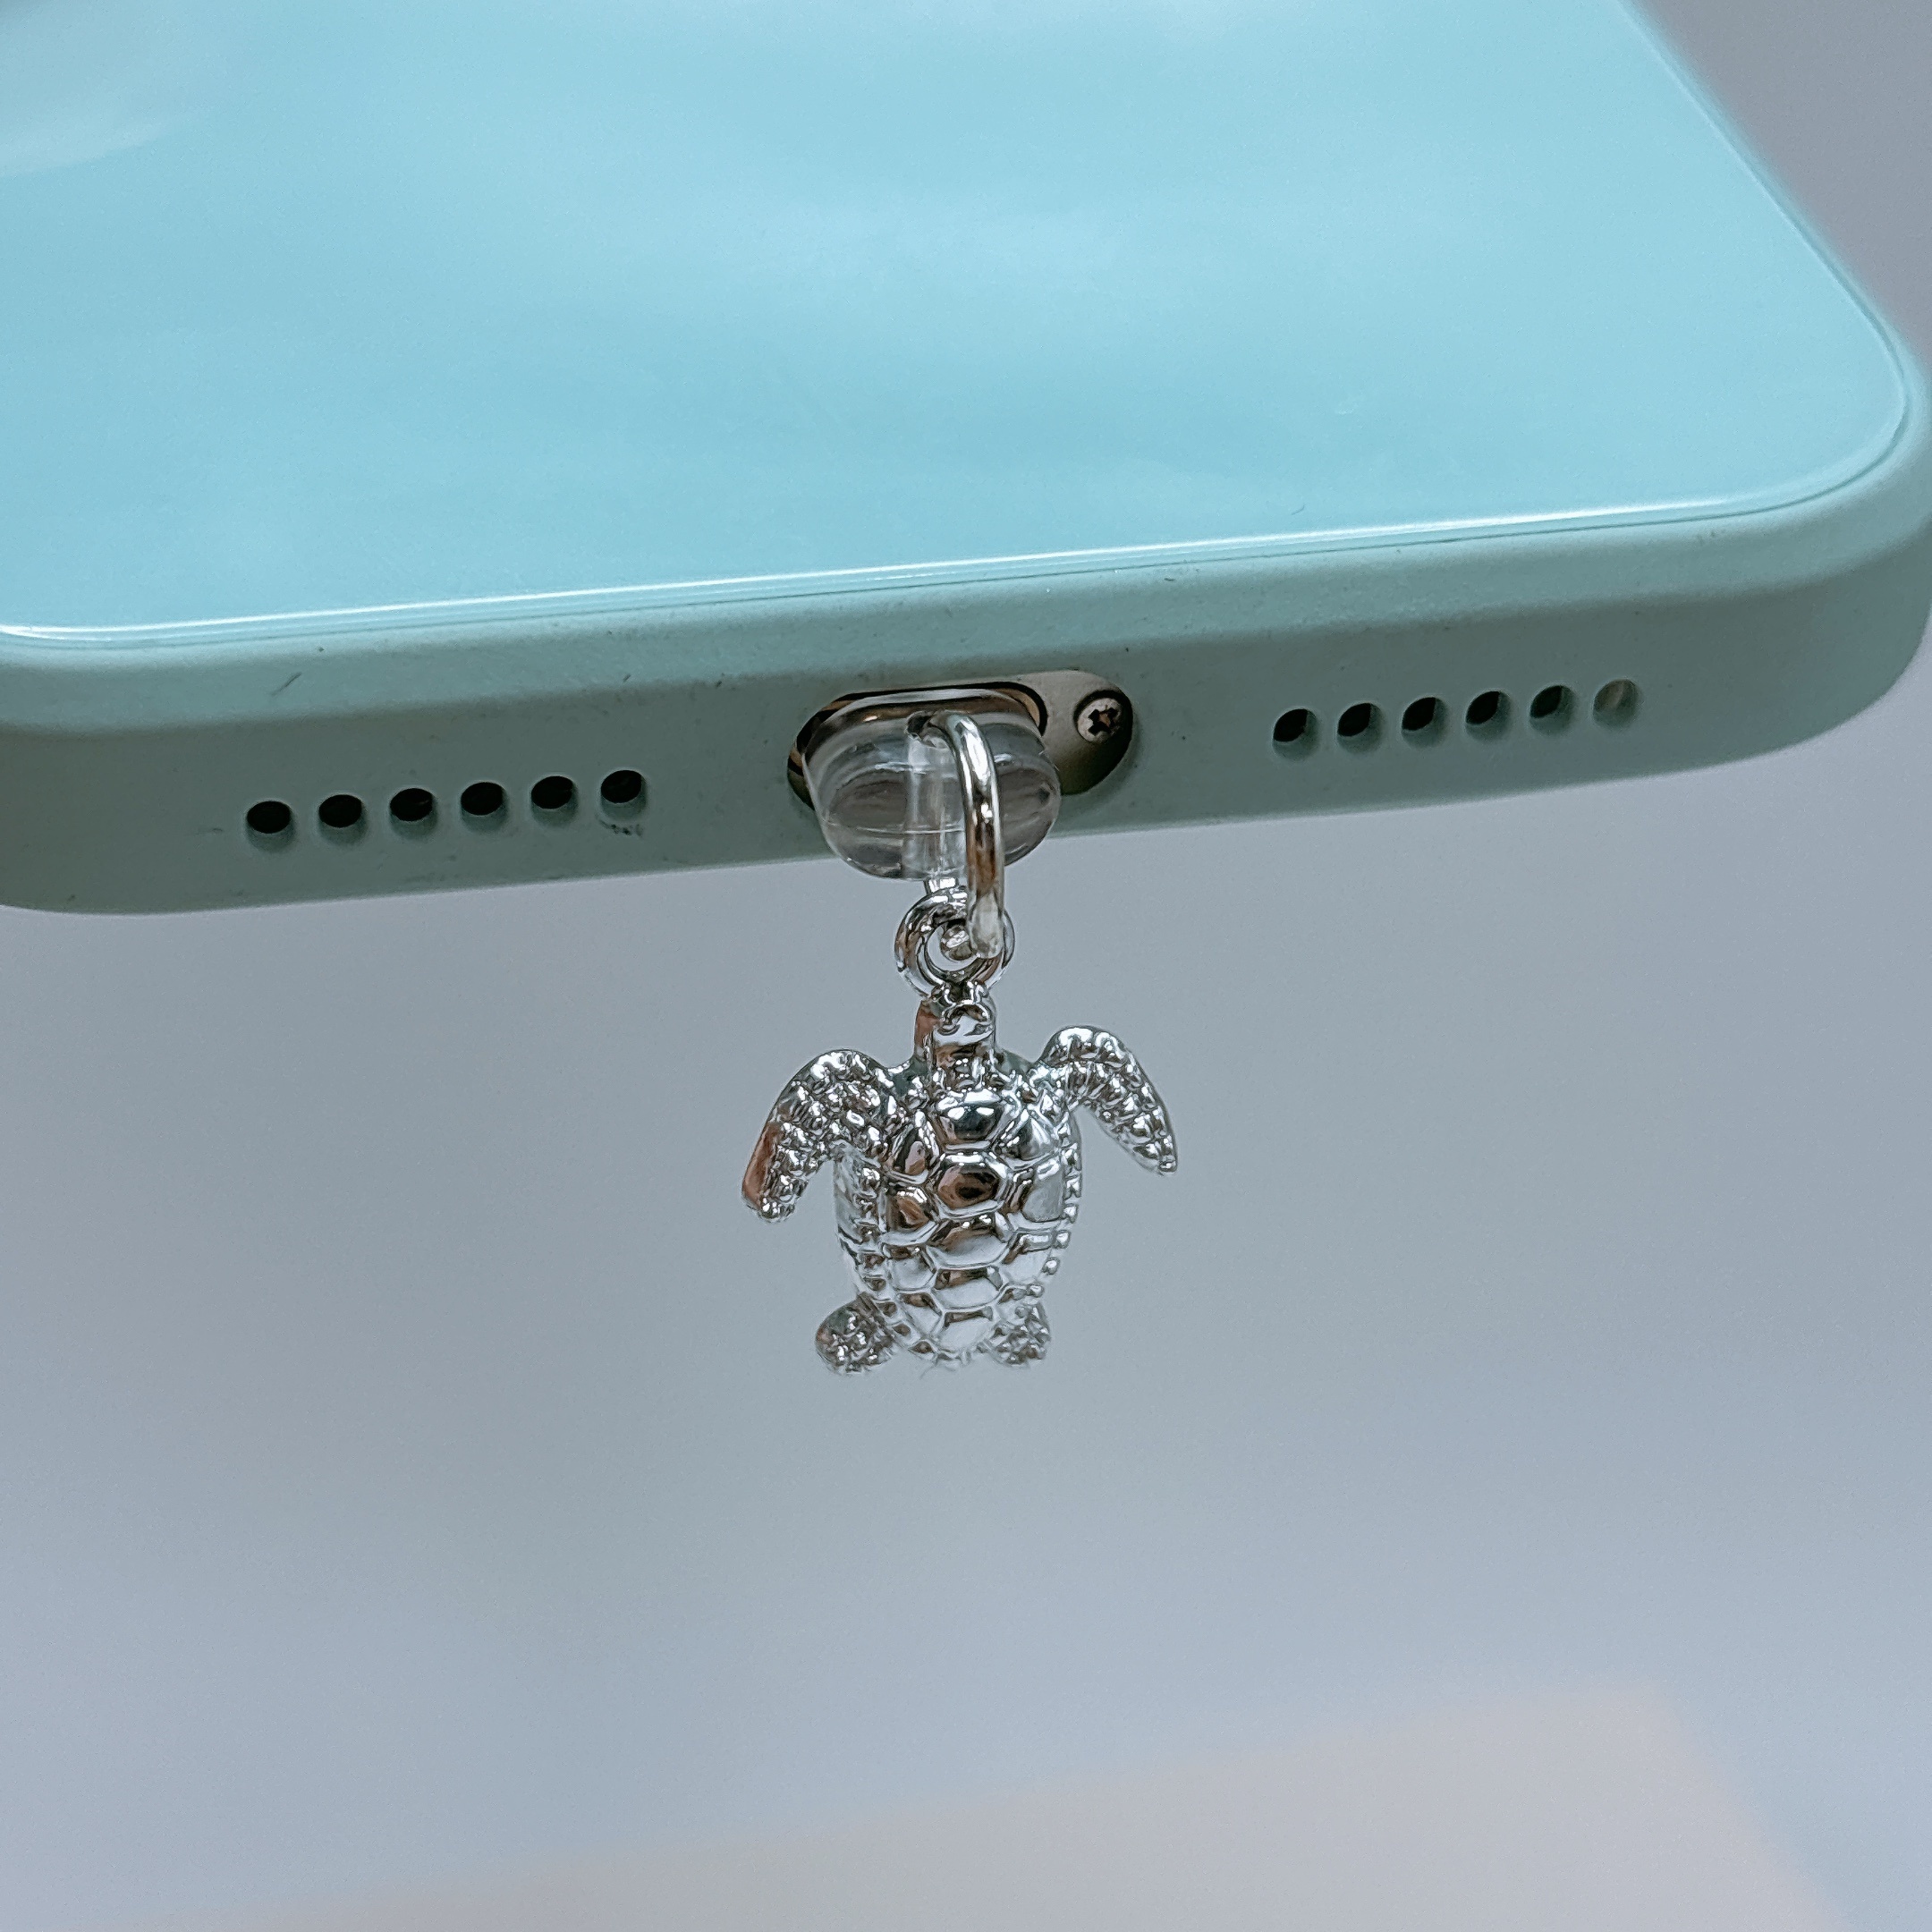 

Turtle Alloy Anti-dust Plug, Universal Phone Charm Compatible With , Android, And Type-c Devices - 1 Pack